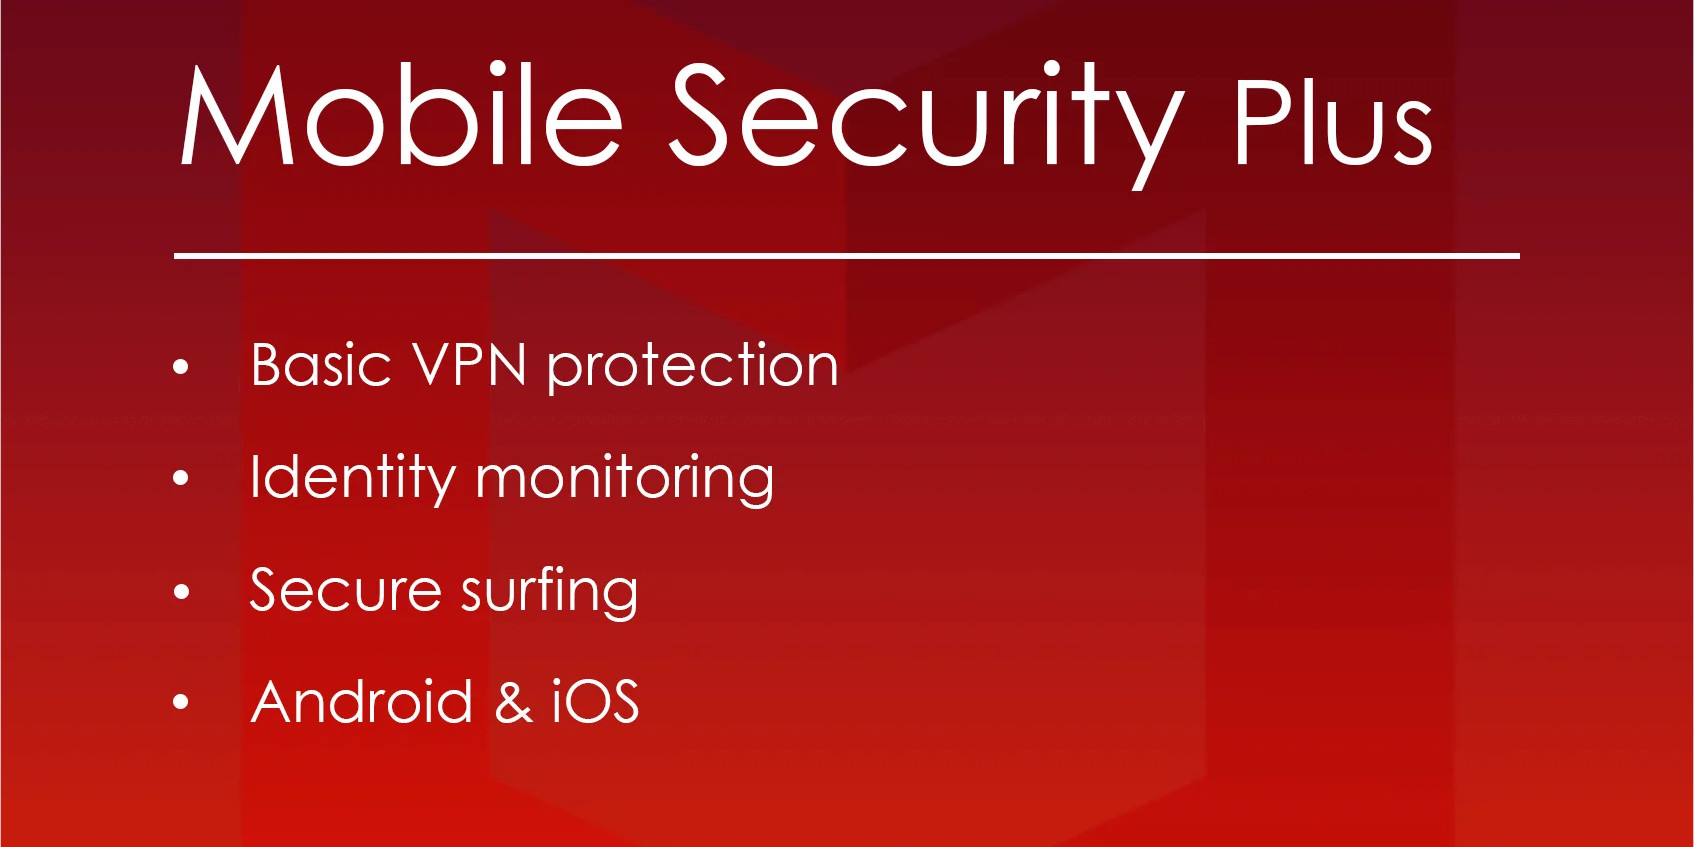 [$ 6.75] McAfee Mobile Security Plus VPN Key (1 Year / Unlimited Devices)